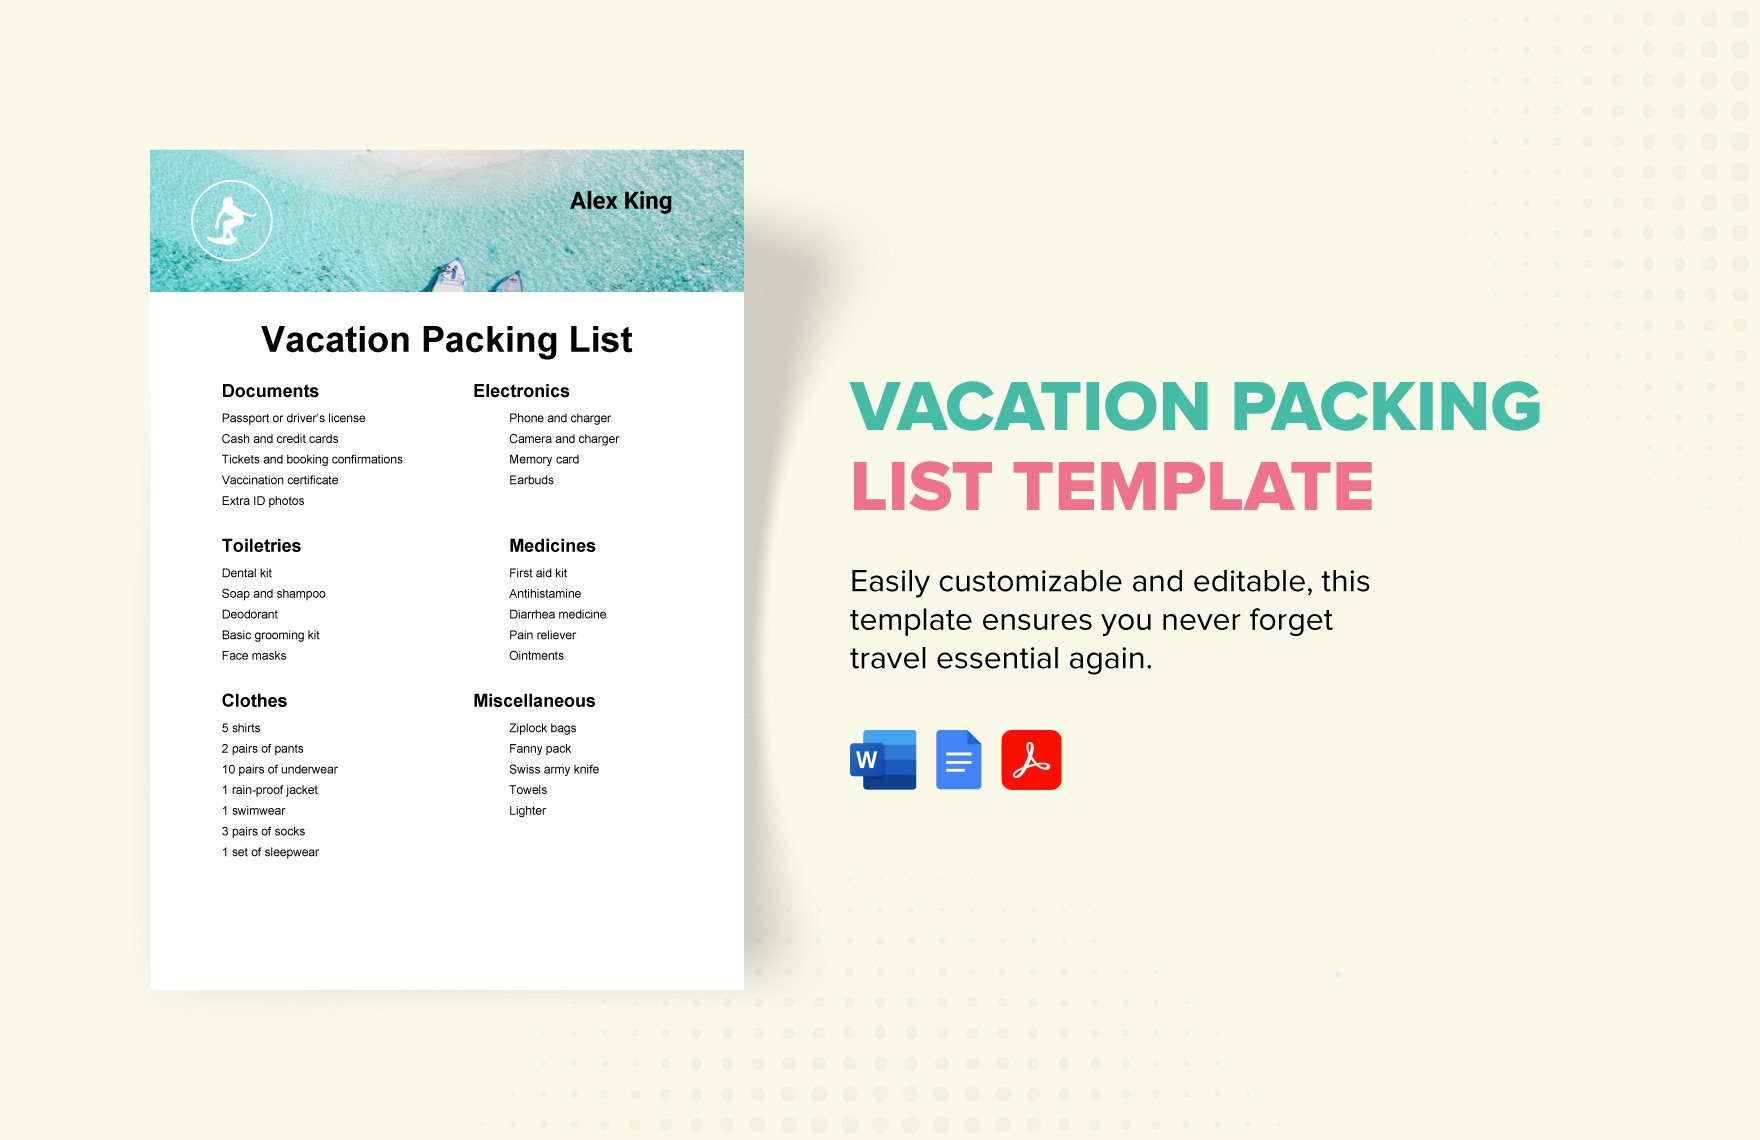 Vacation Packing List Template